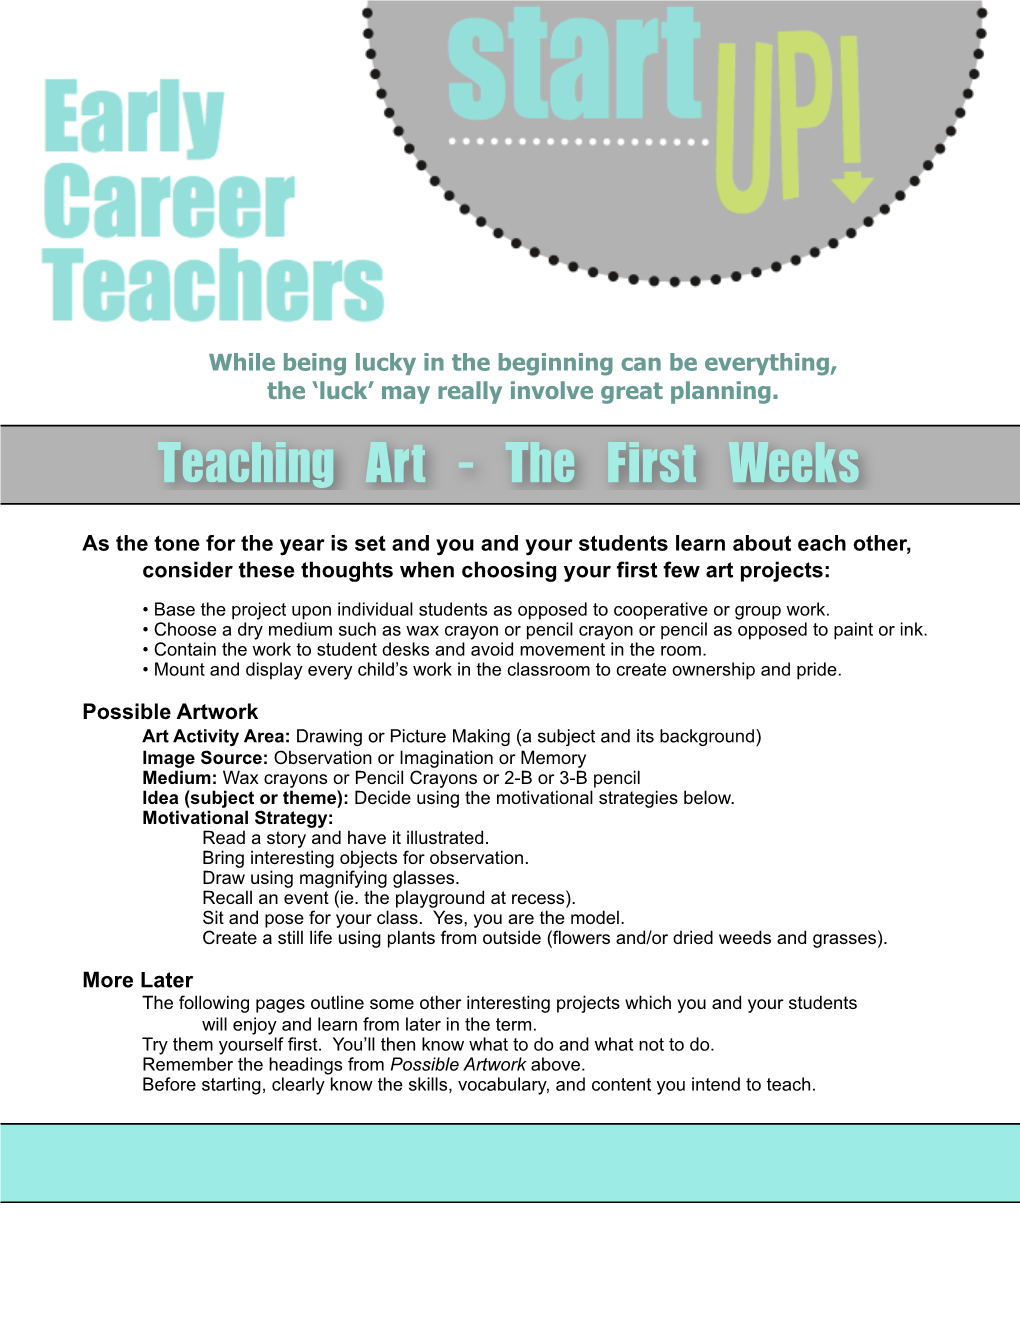 Art Projects for PITA's Early Career Teachers.Pdf